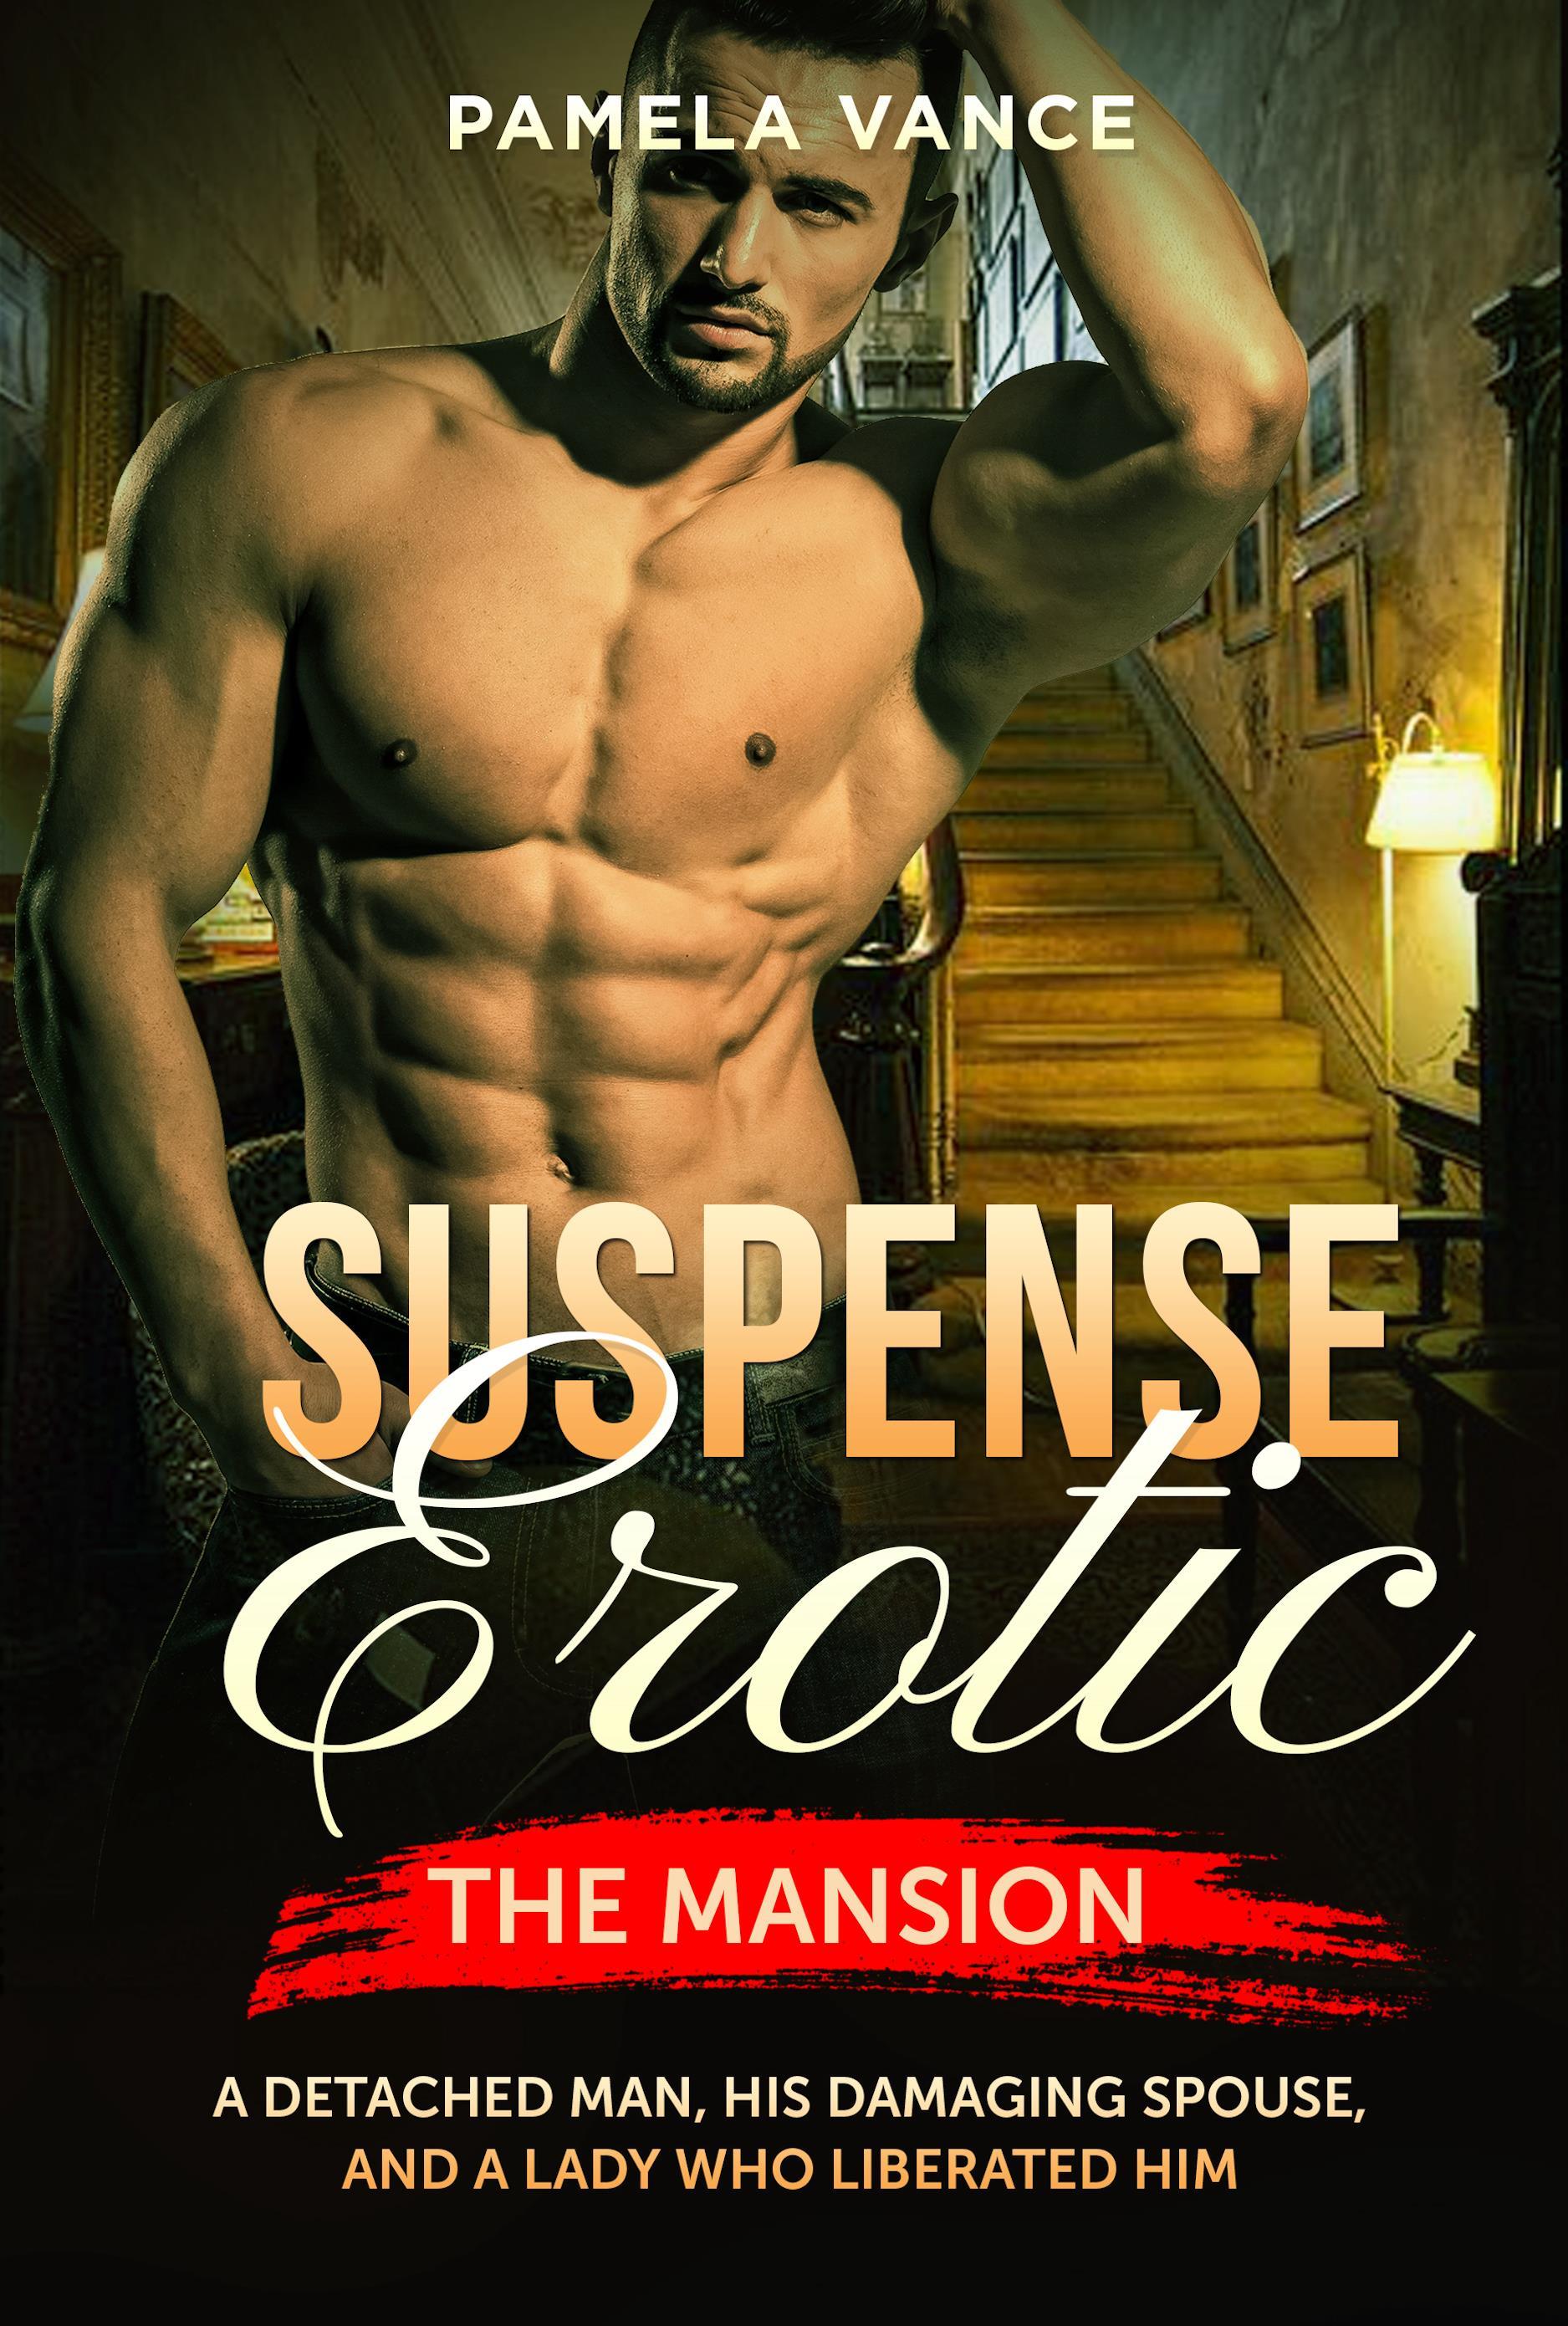 Husband And Wife Gangbang Girl - Suspense Erotica. The Mansion. A detached man, his damaging spouse, and a  lady who liberated him. di Pamela Vance | ePub